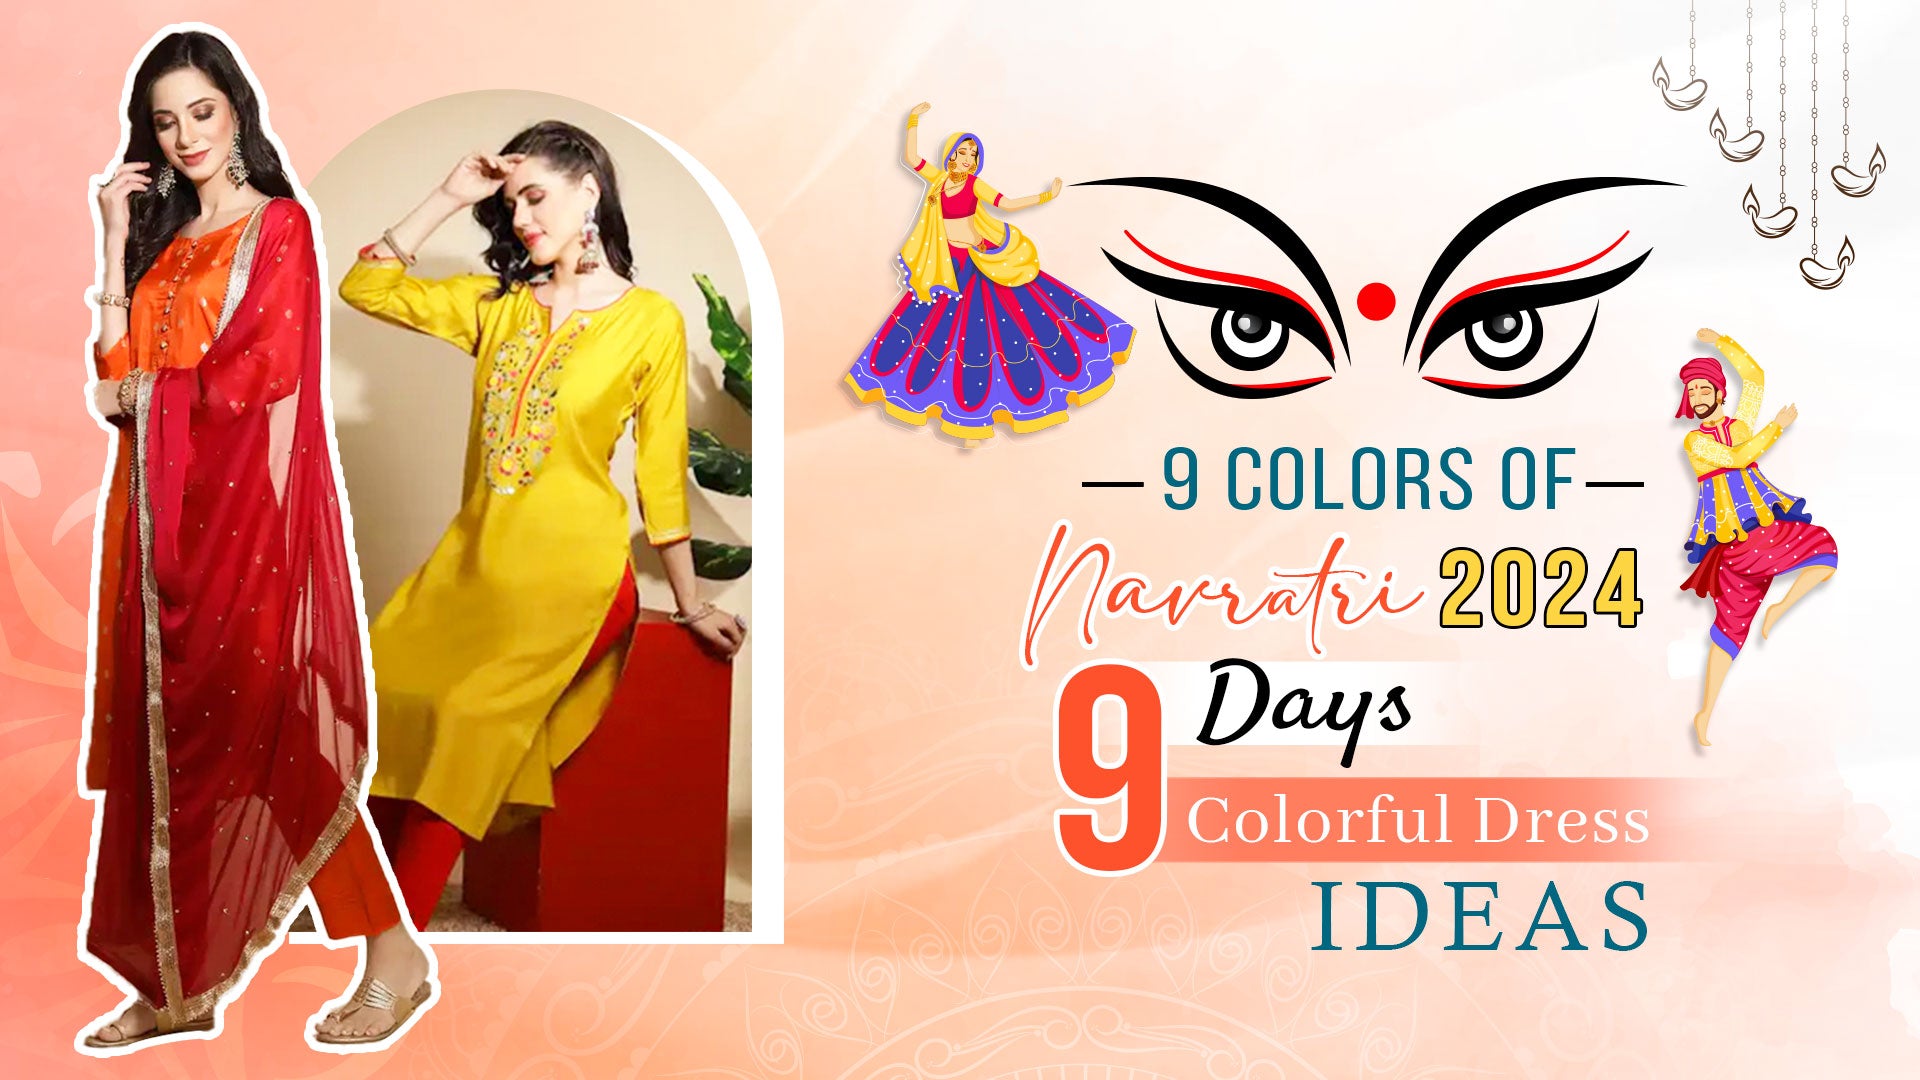 9 colorful outfits ideas for Navratri 